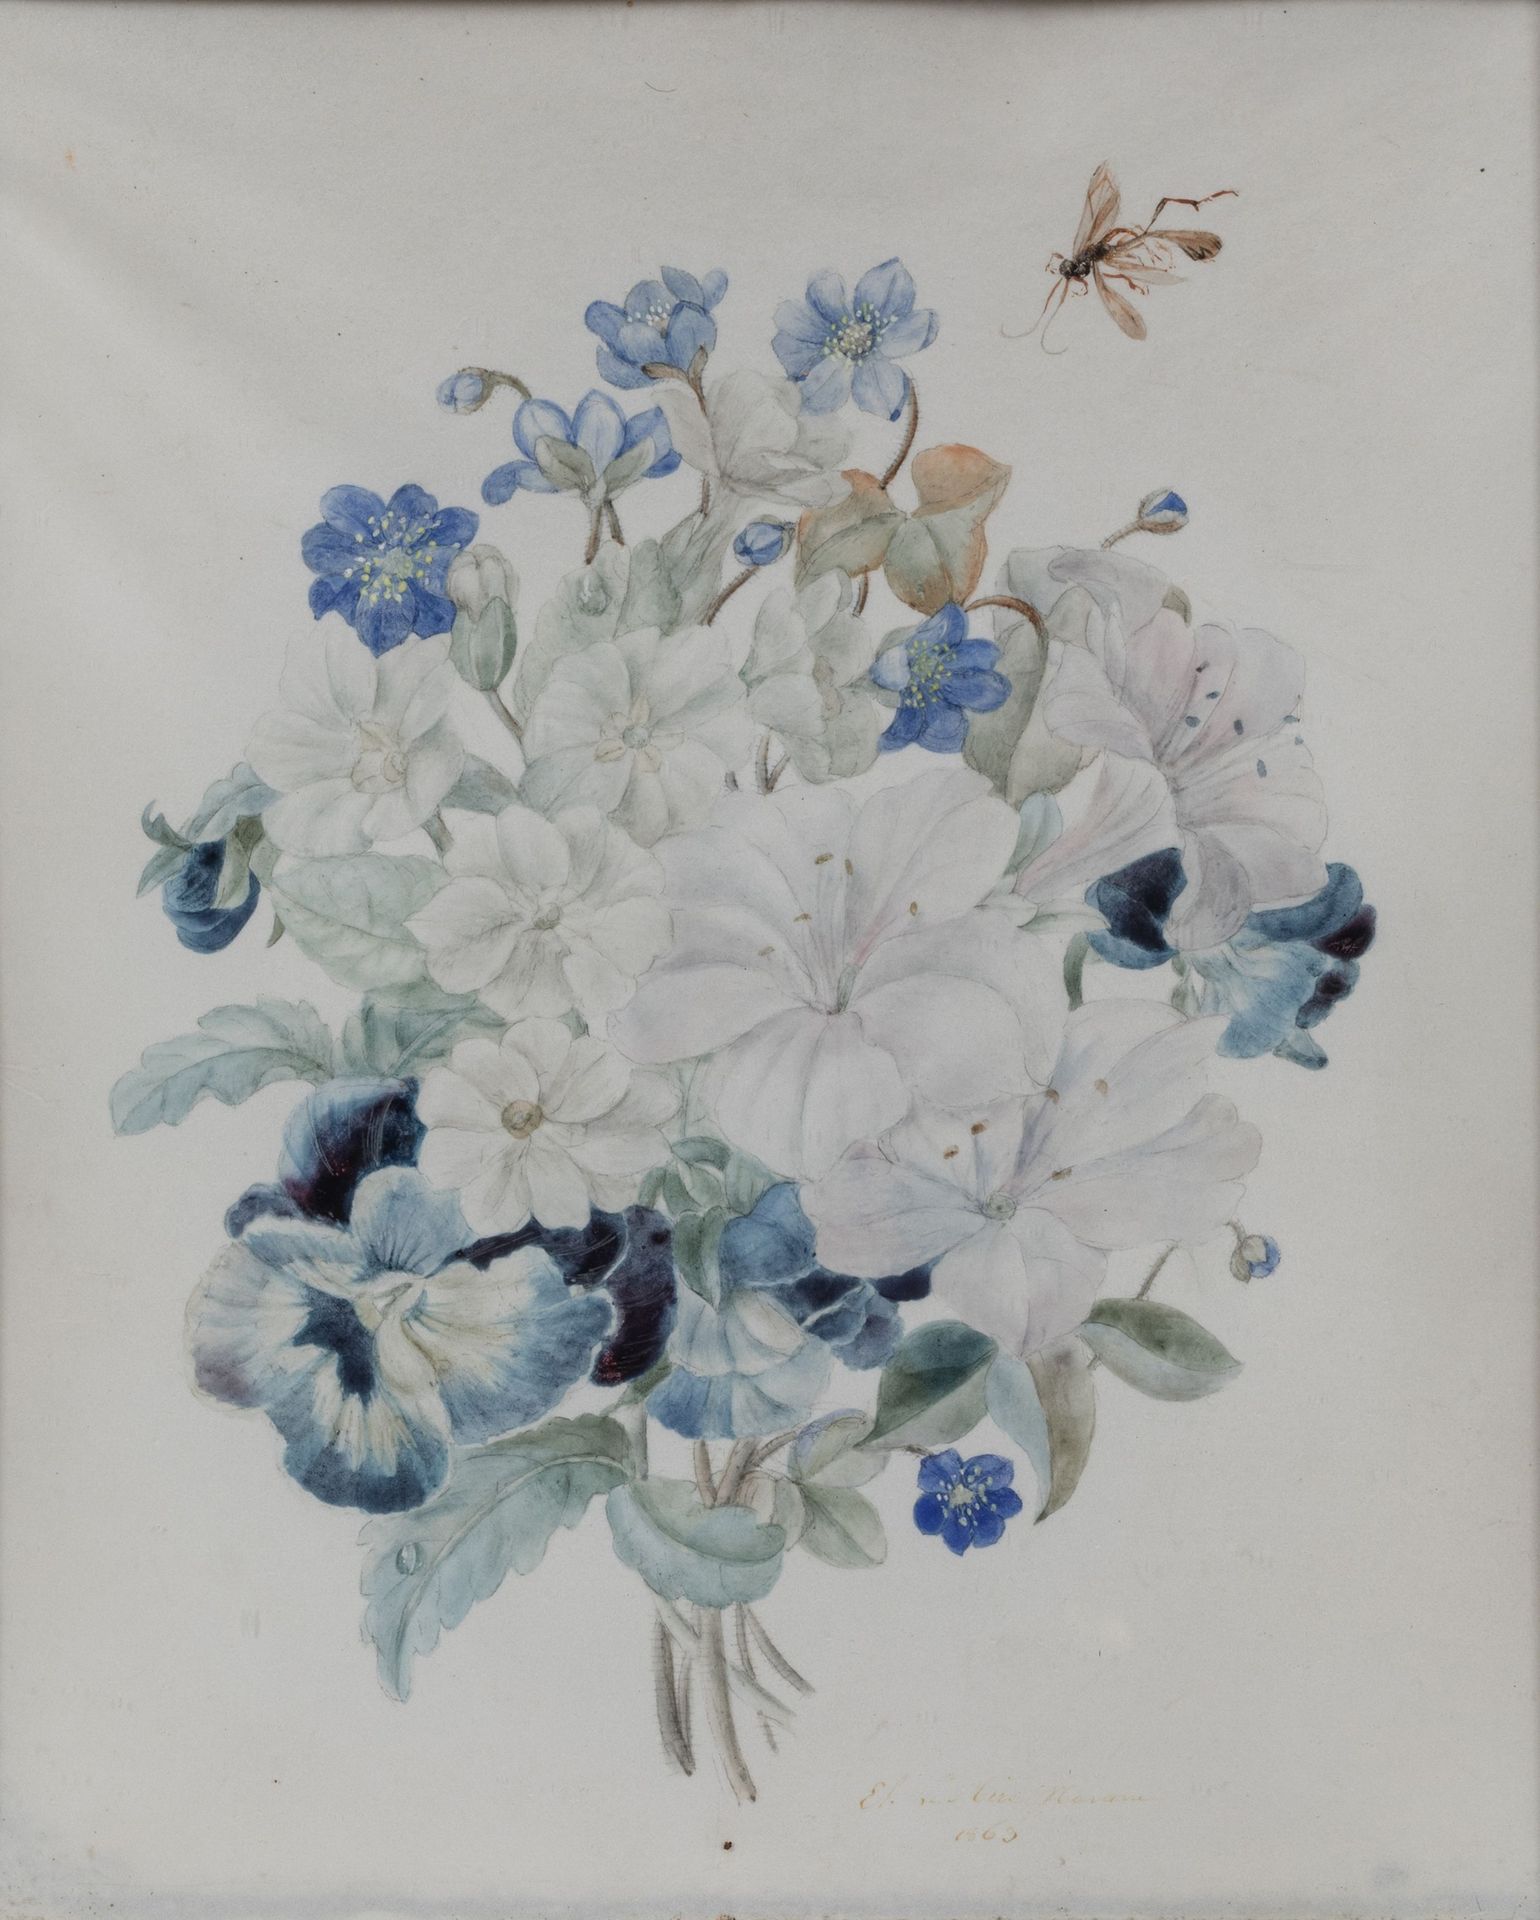 Null Elisa Emilie NAVARRE-LEMIRE (1807-1868)

White and blue flowers with a wasp&hellip;